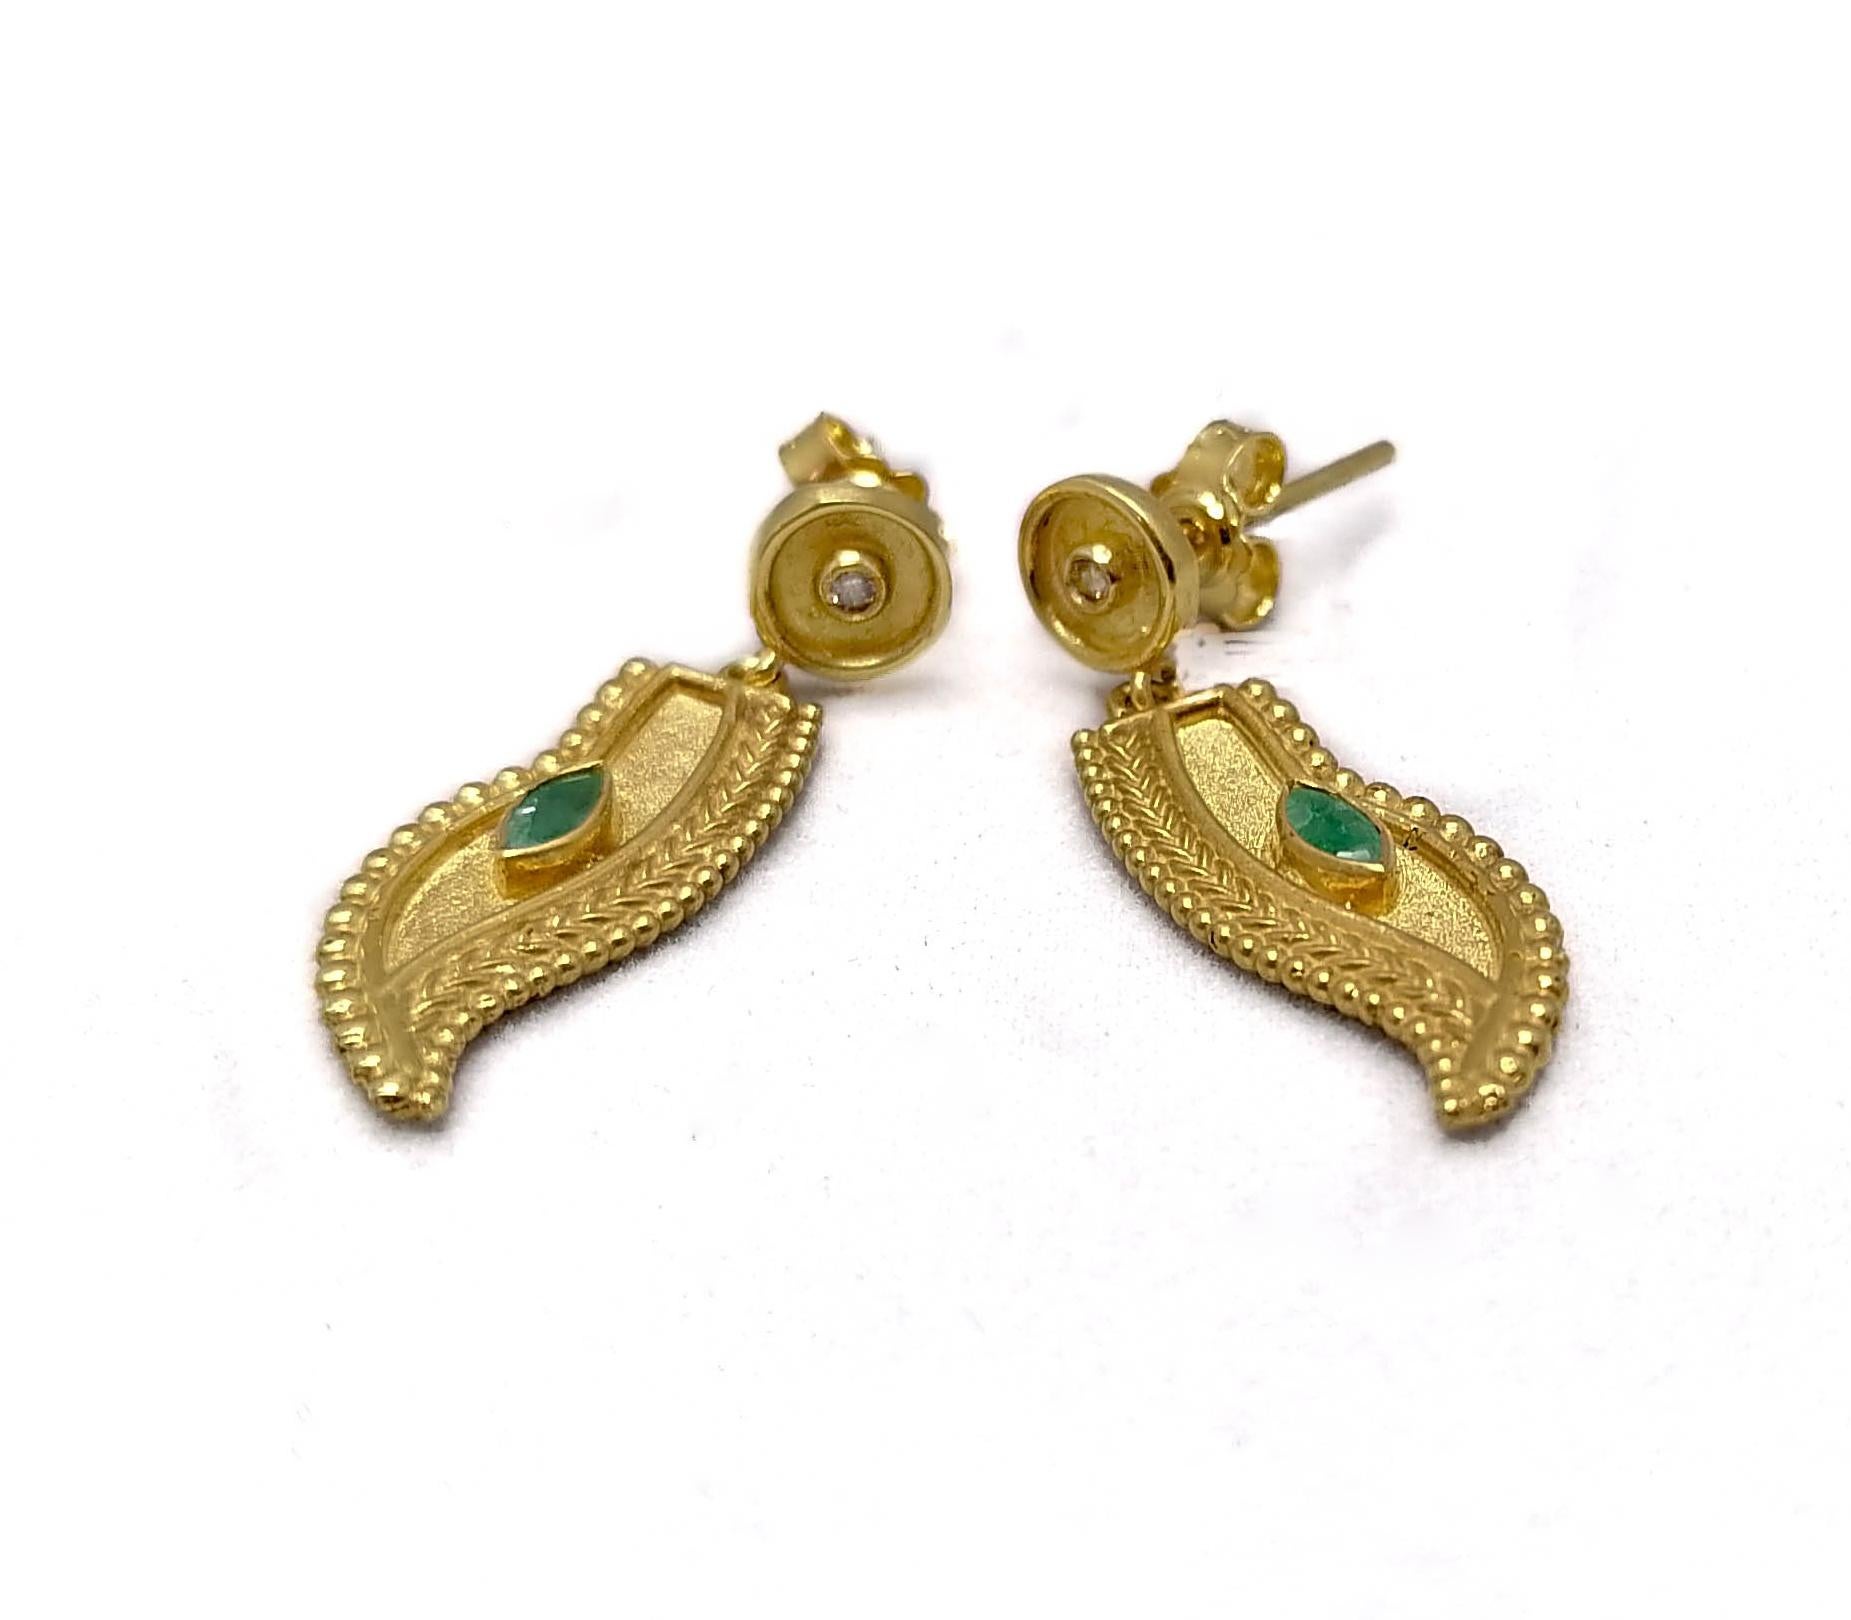 These S.Georgios 18 Karat Yellow Gold designer earrings are hand made and decorated with Byzantine-era style bead granulation workmanship, and finished with a unique velvet background look. These beautiful feather design earrings feature 2